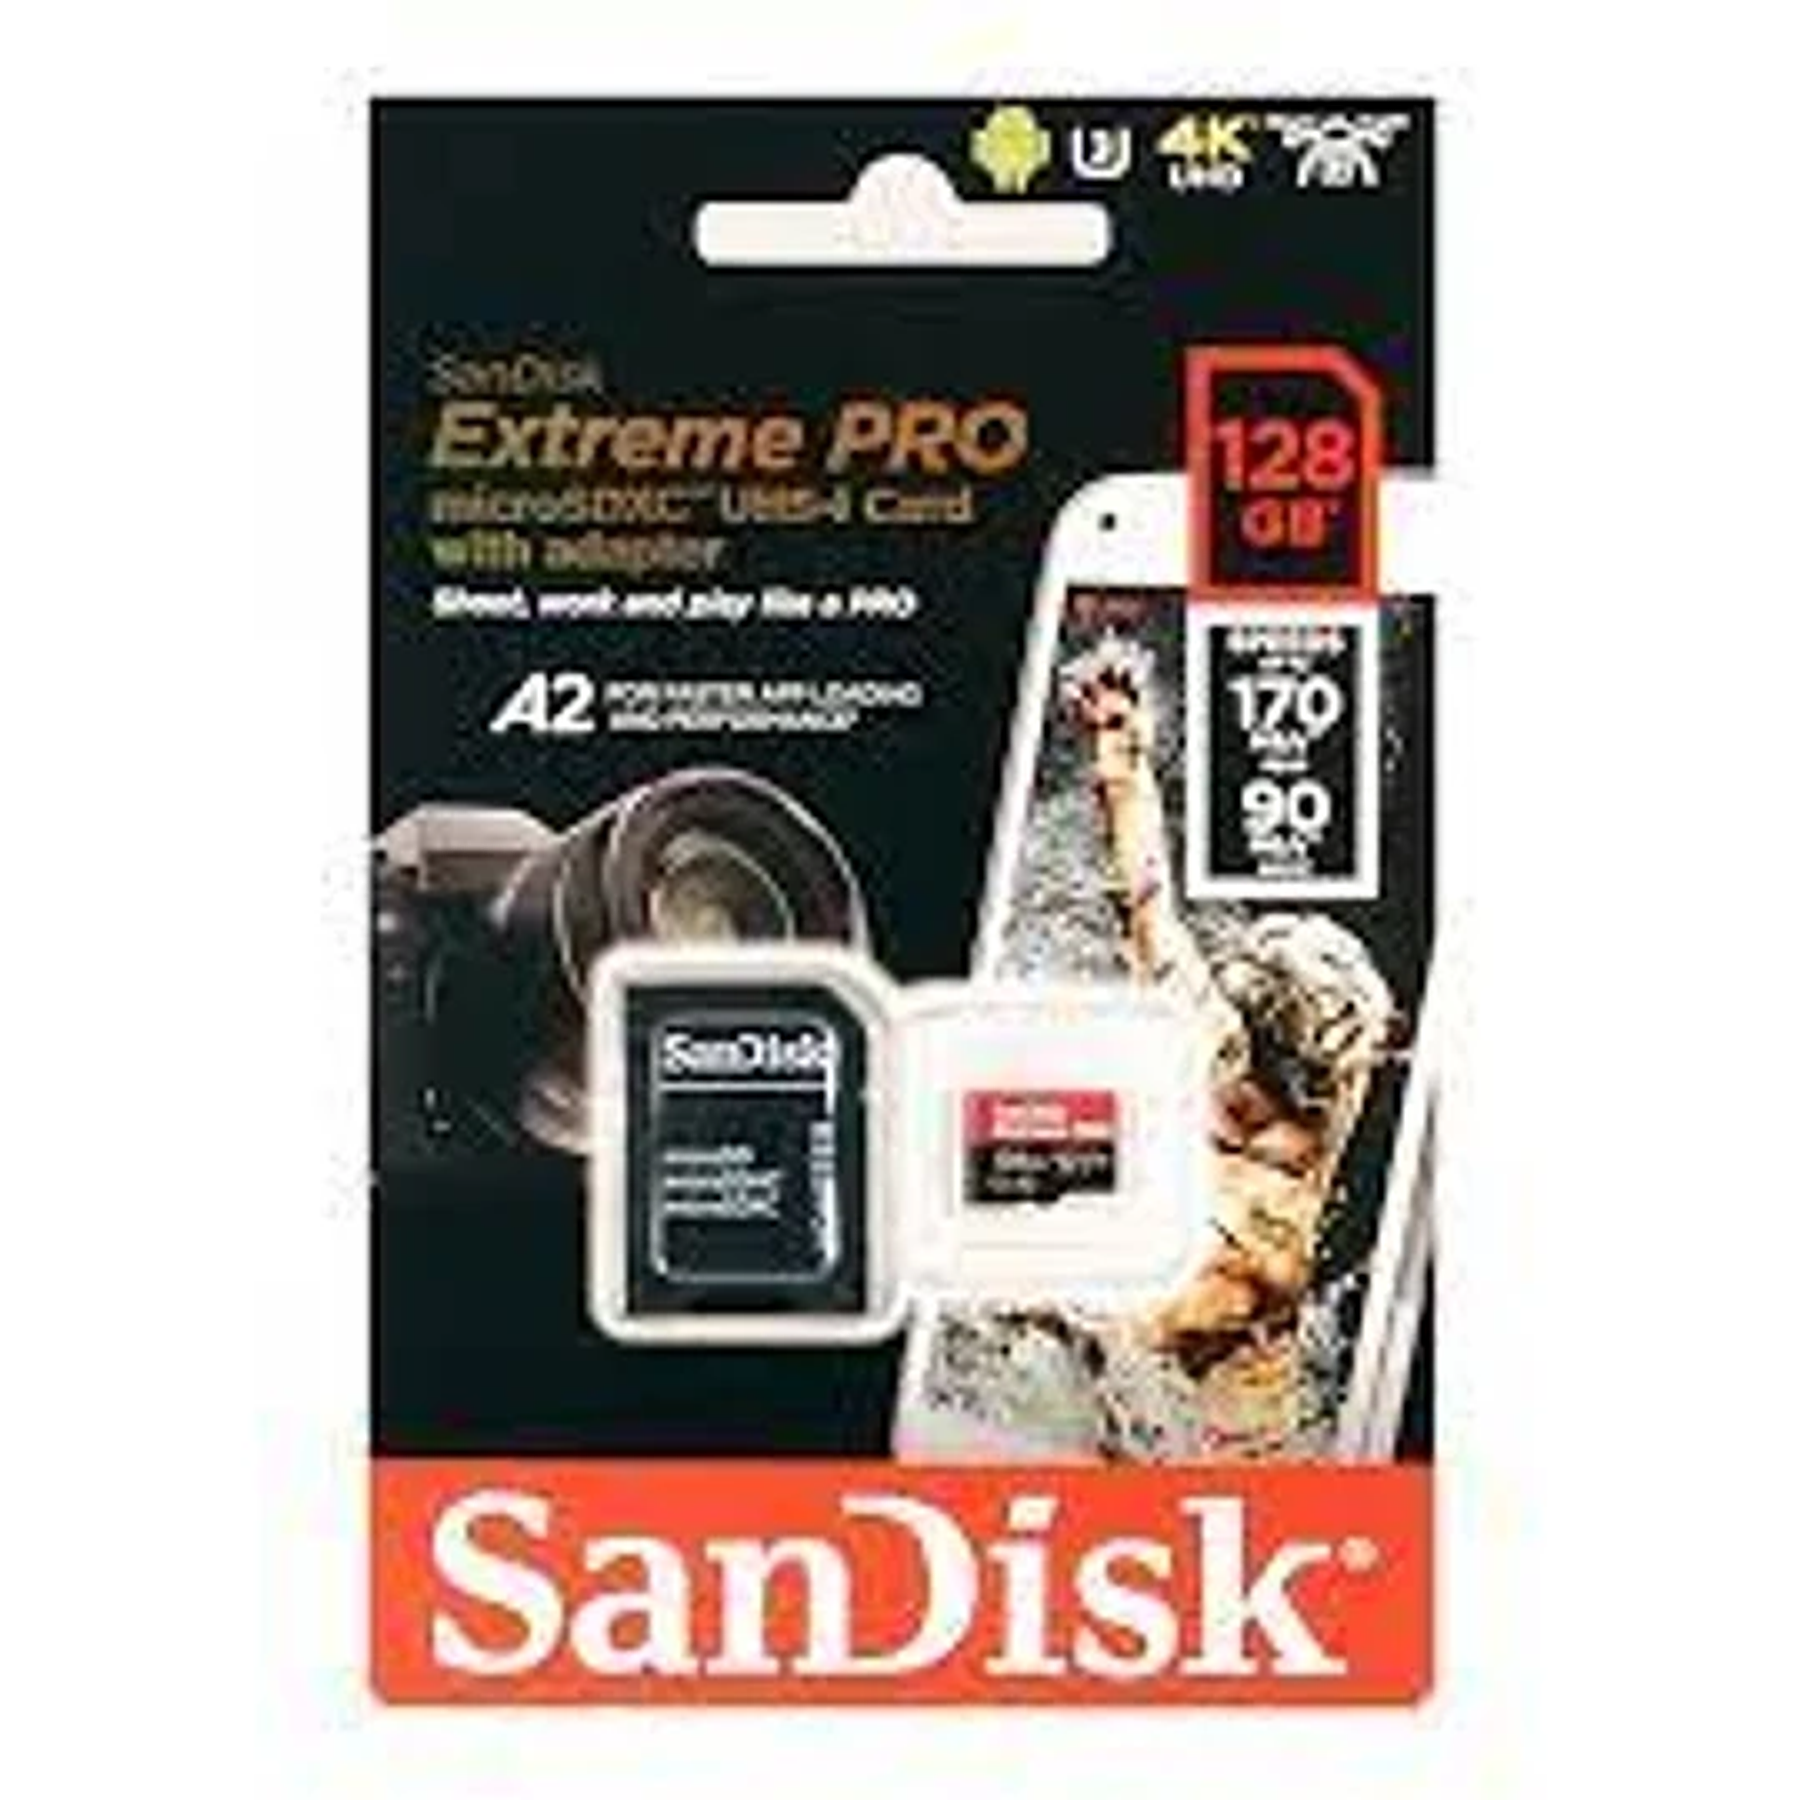 Memoria Micro SDHC 128GB Sandisk Extreme Pro, UHS-I Clase 10, con Adaptador, Up to 200 MB/s